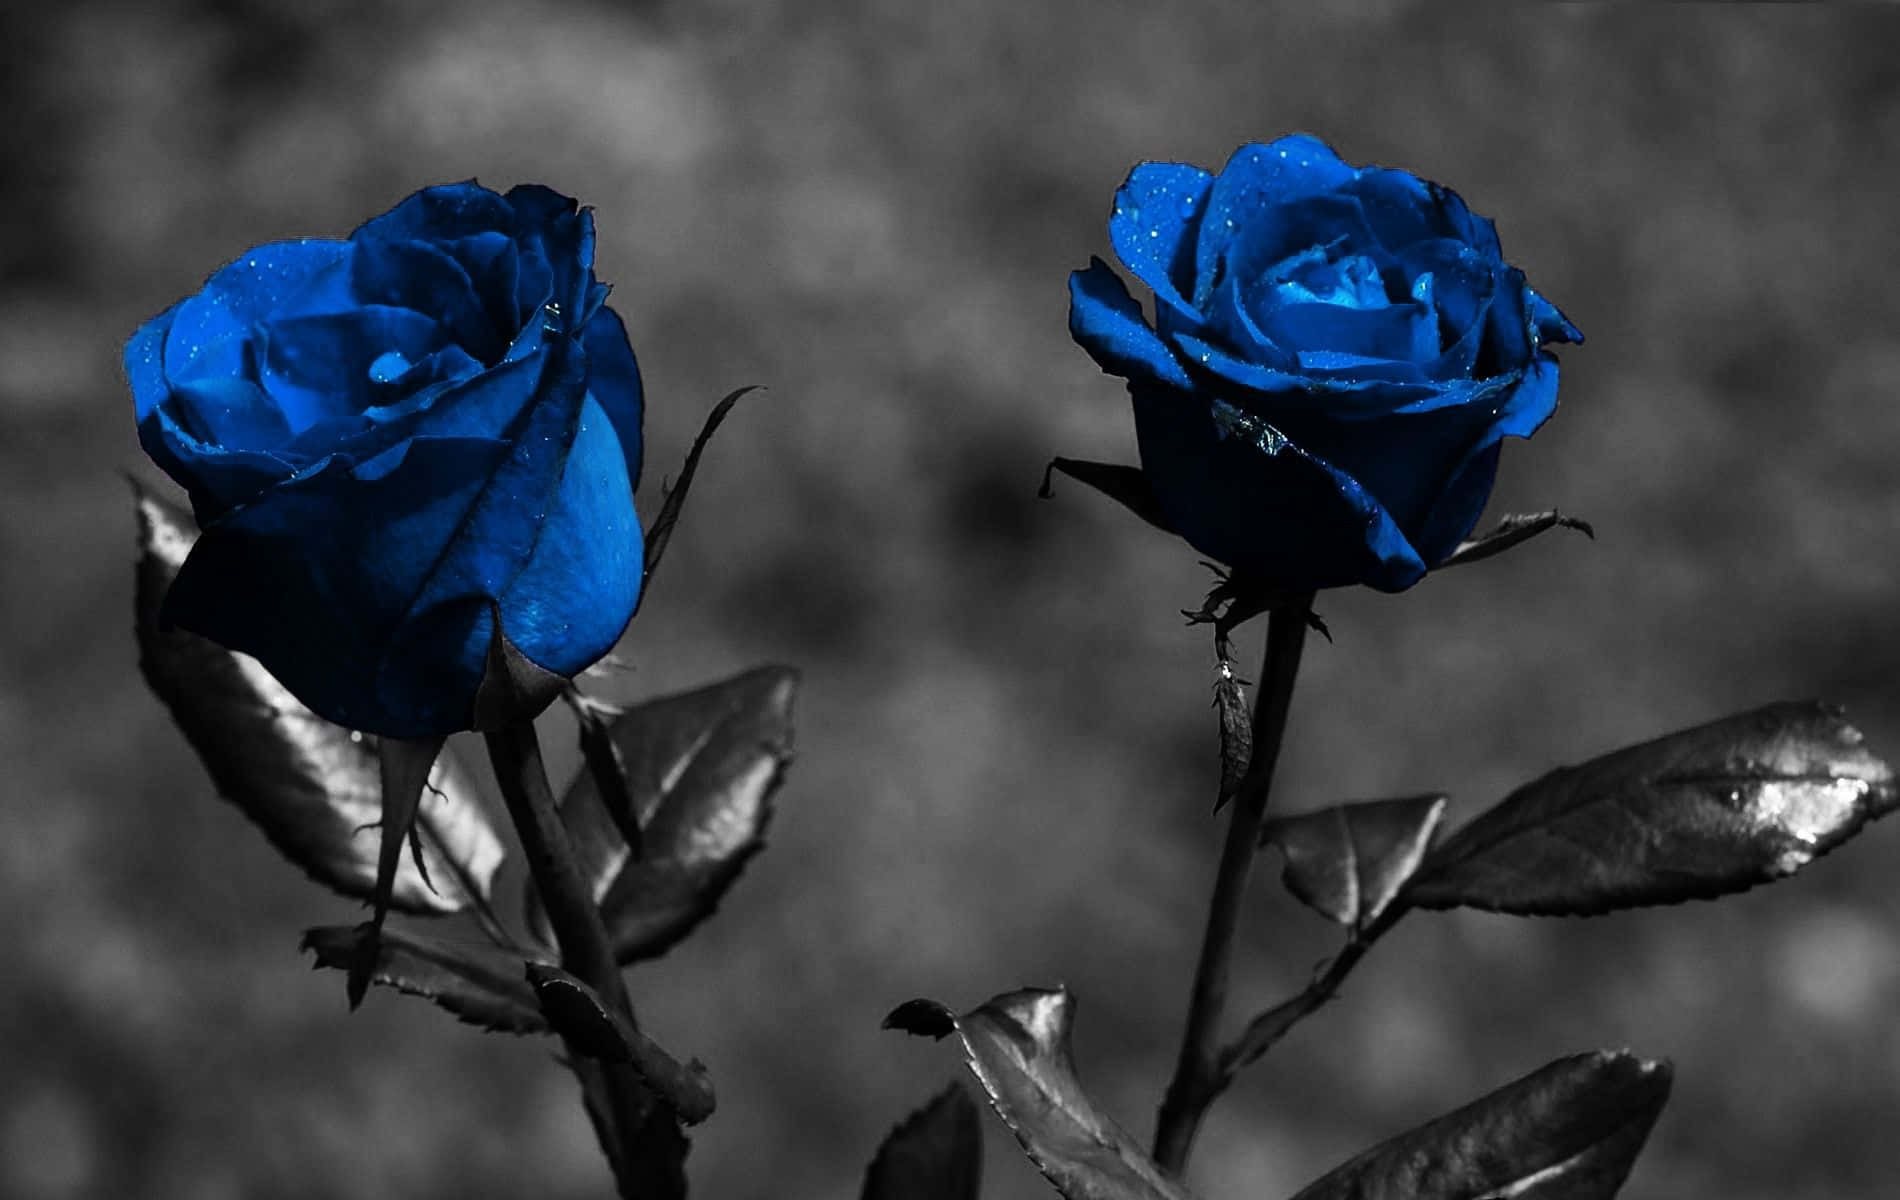 Two Blue Roses Are Shown In Black And White